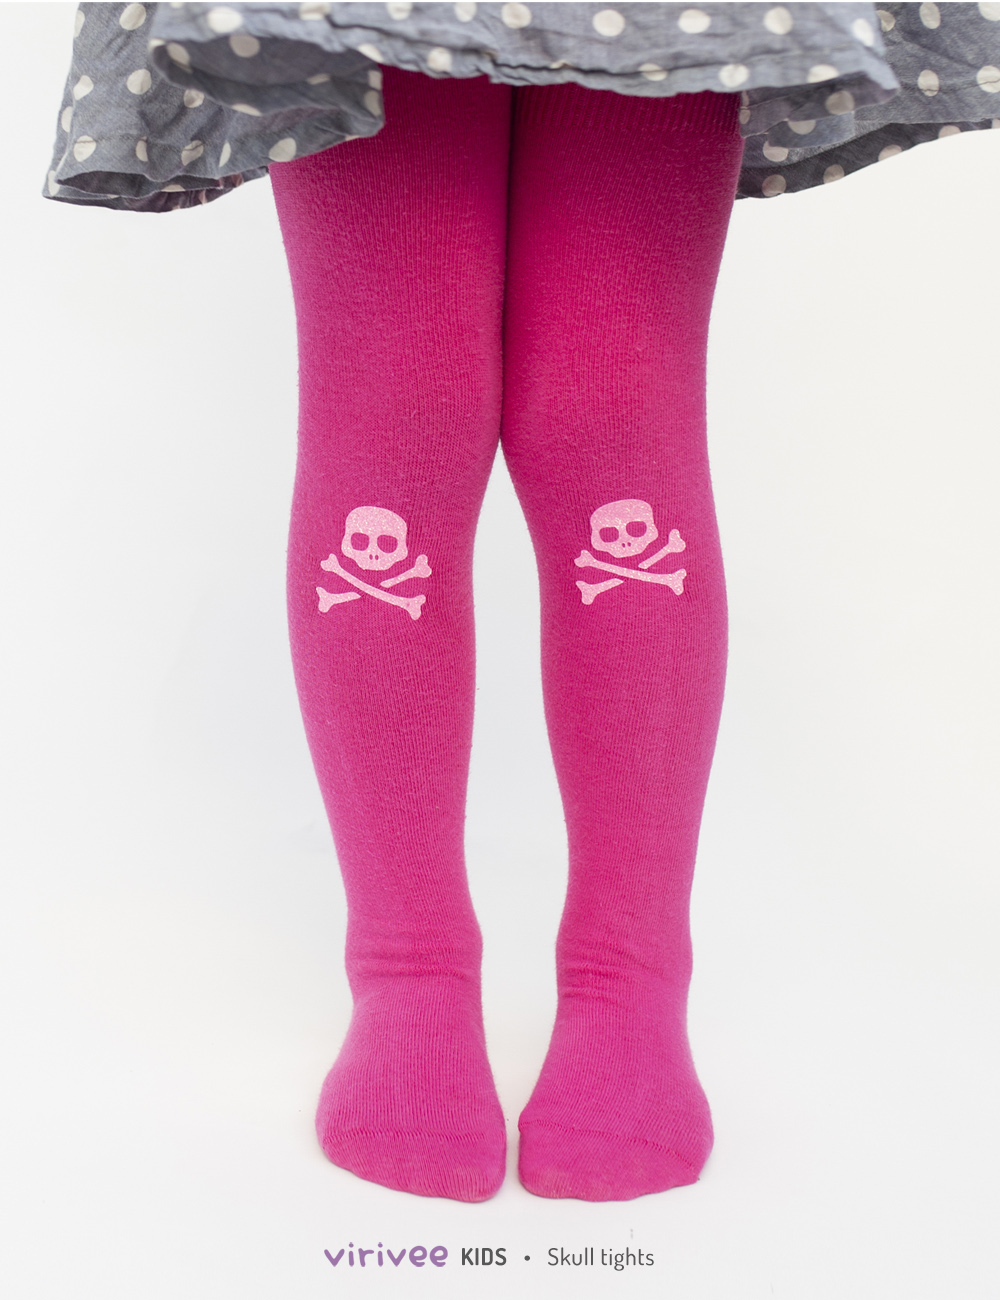 Large skull and crossbones tights